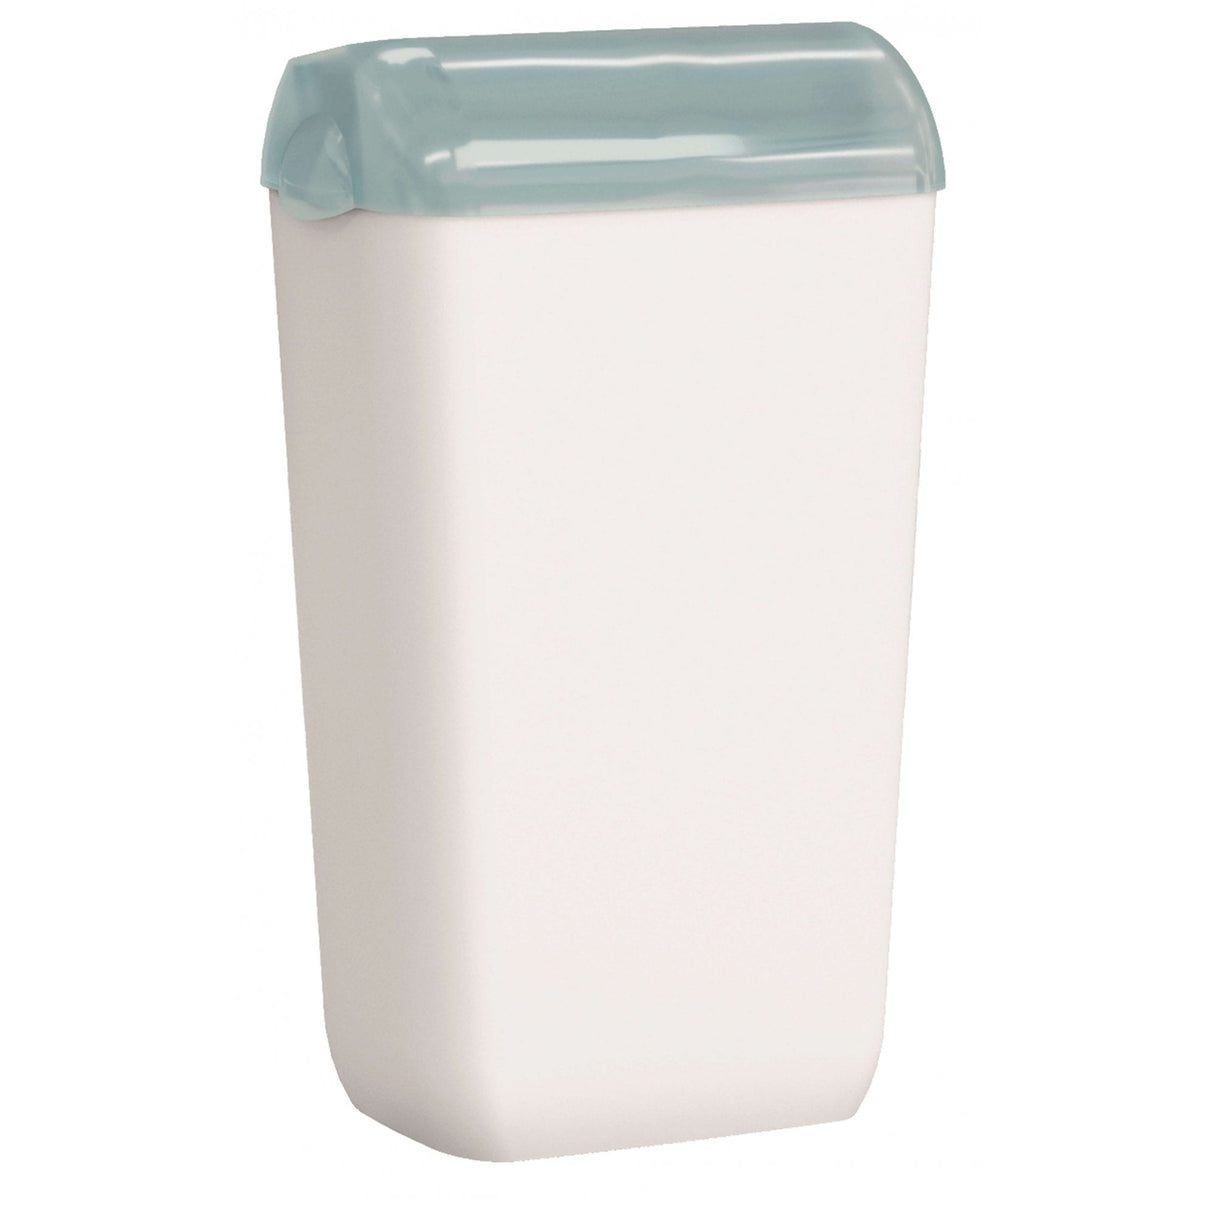 ReGen 23L Bin With Open Top Made Of Recycled Plastics And Bag Holder